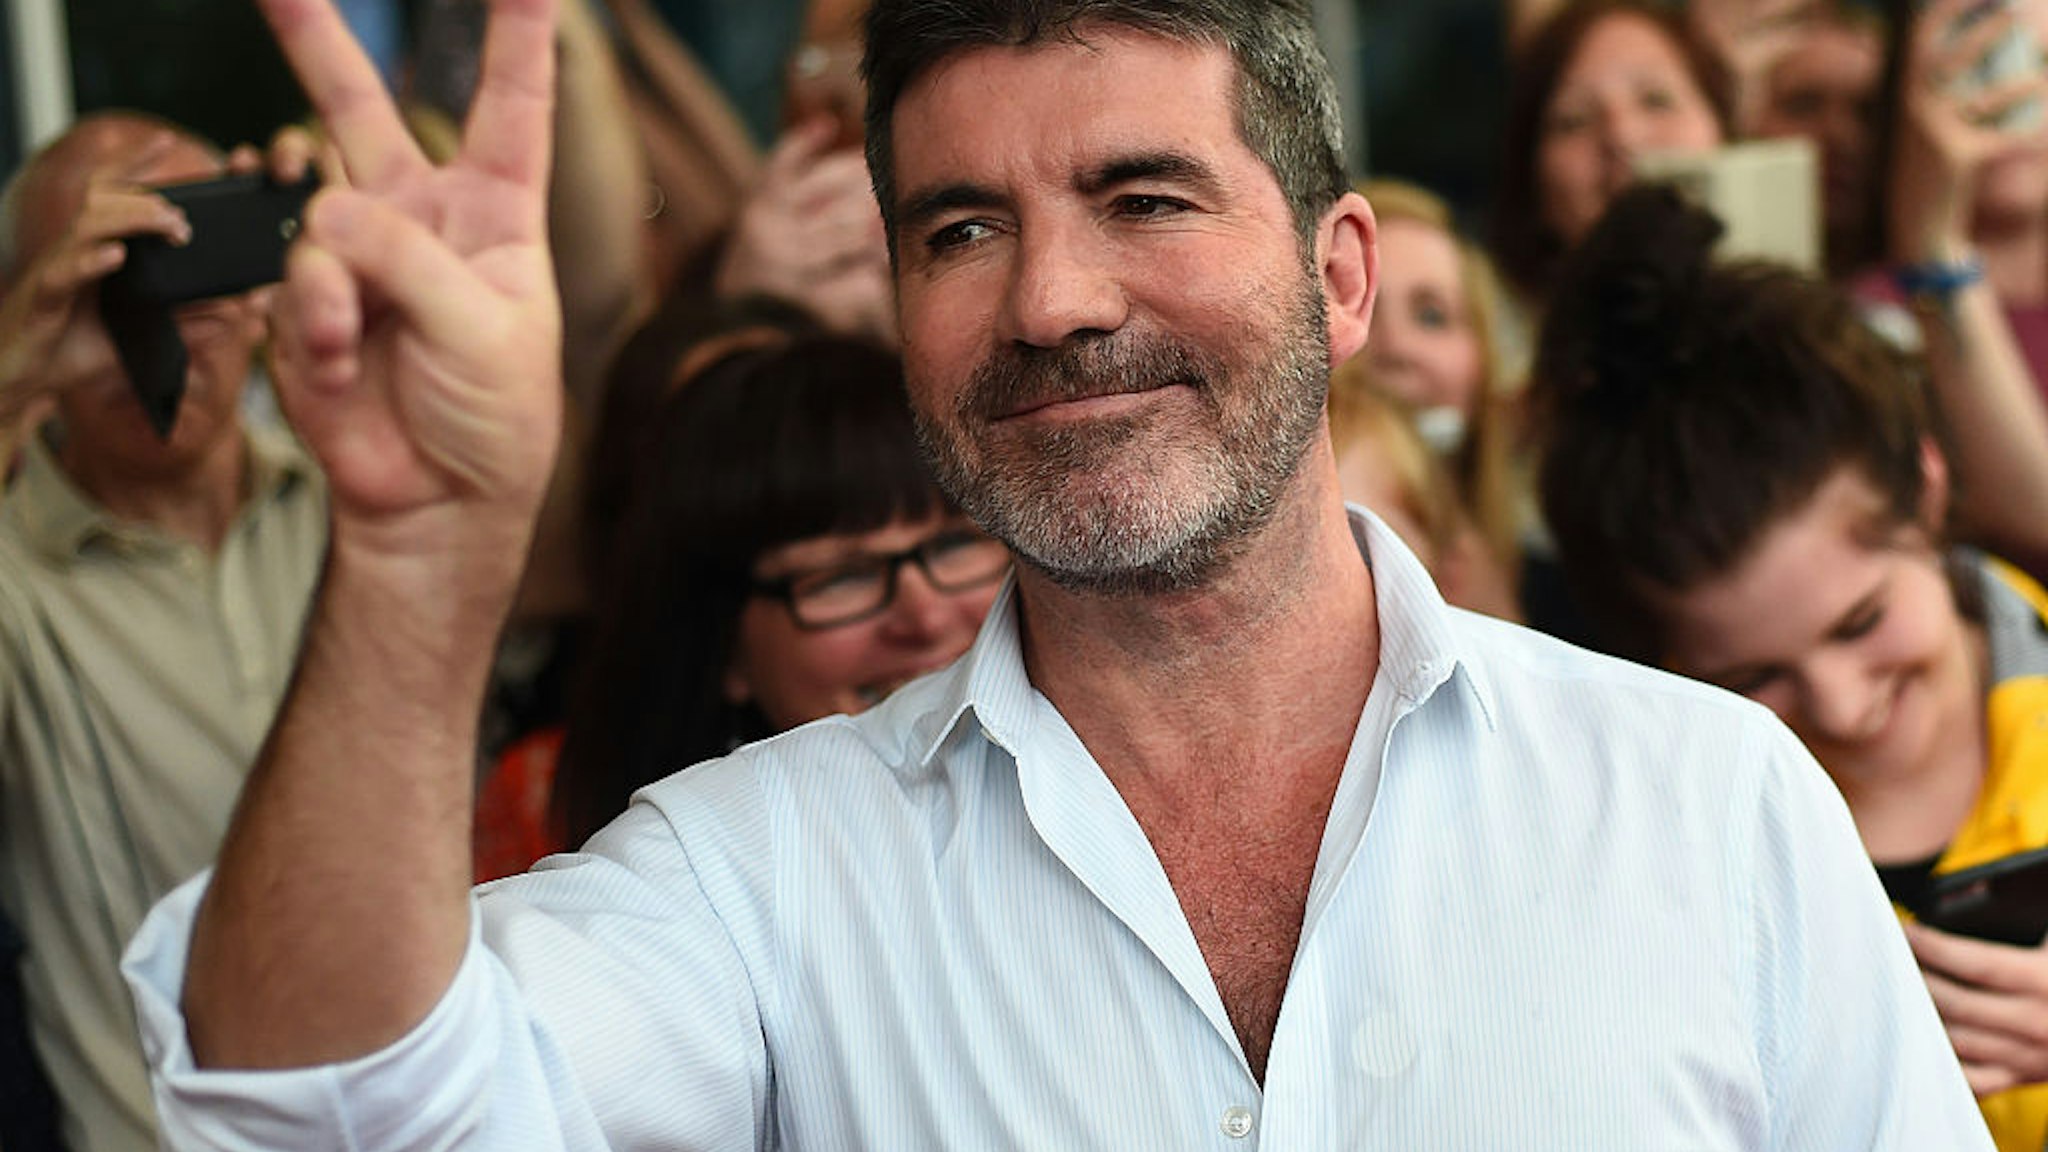 LEICESTER, ENGLAND - JUNE 10: Simon Cowell arrives for the first X Factor auditions of 2016 on June 10, 2016 in Leicester, United Kingdom.